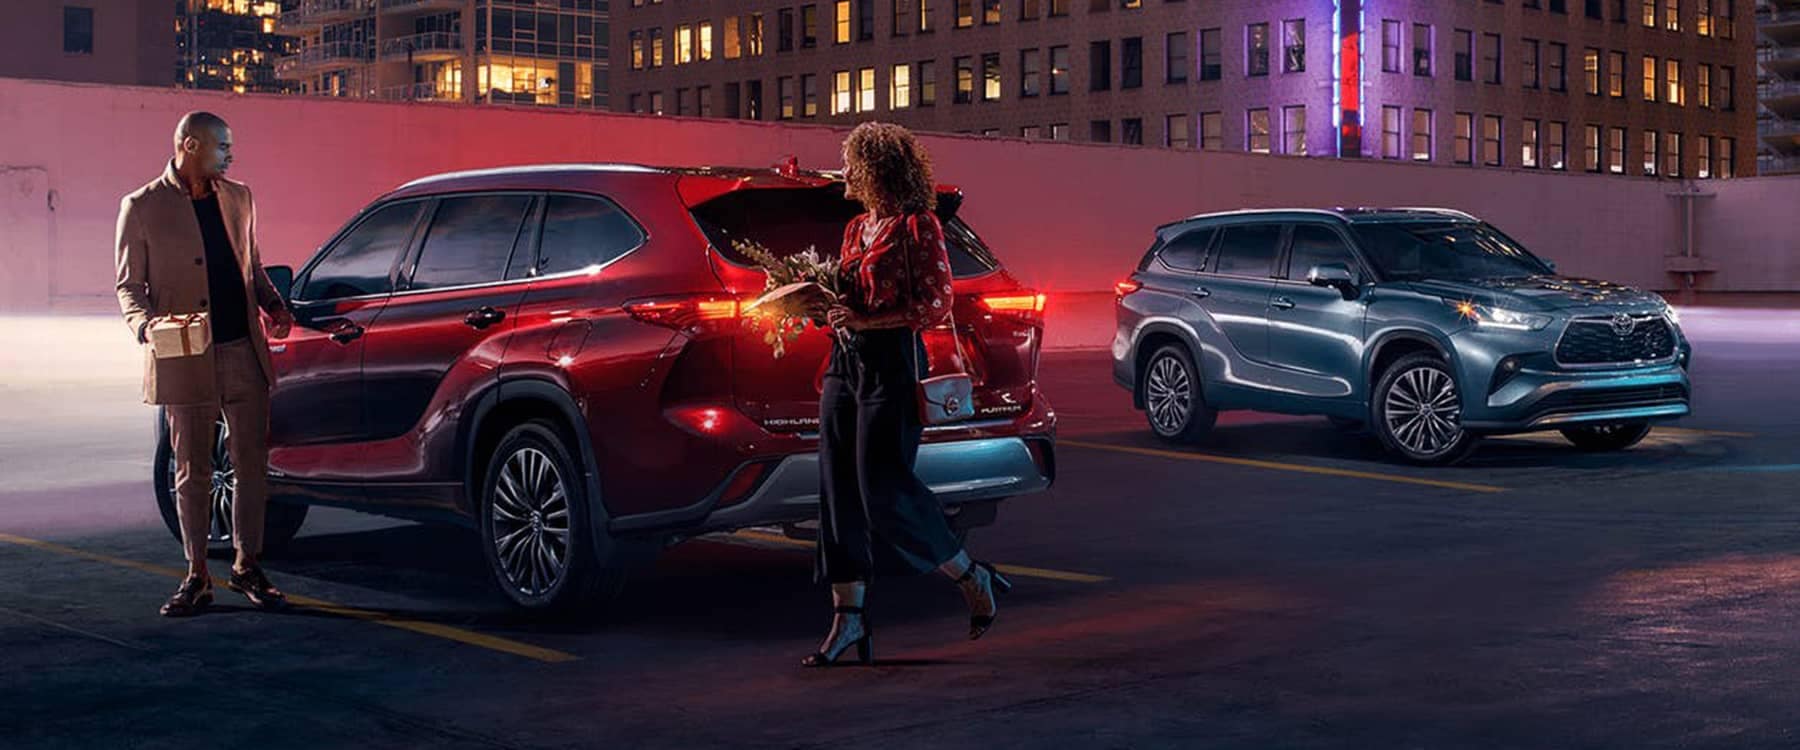 2021 Toyota Highlander Hybrid parked with two people with gifts